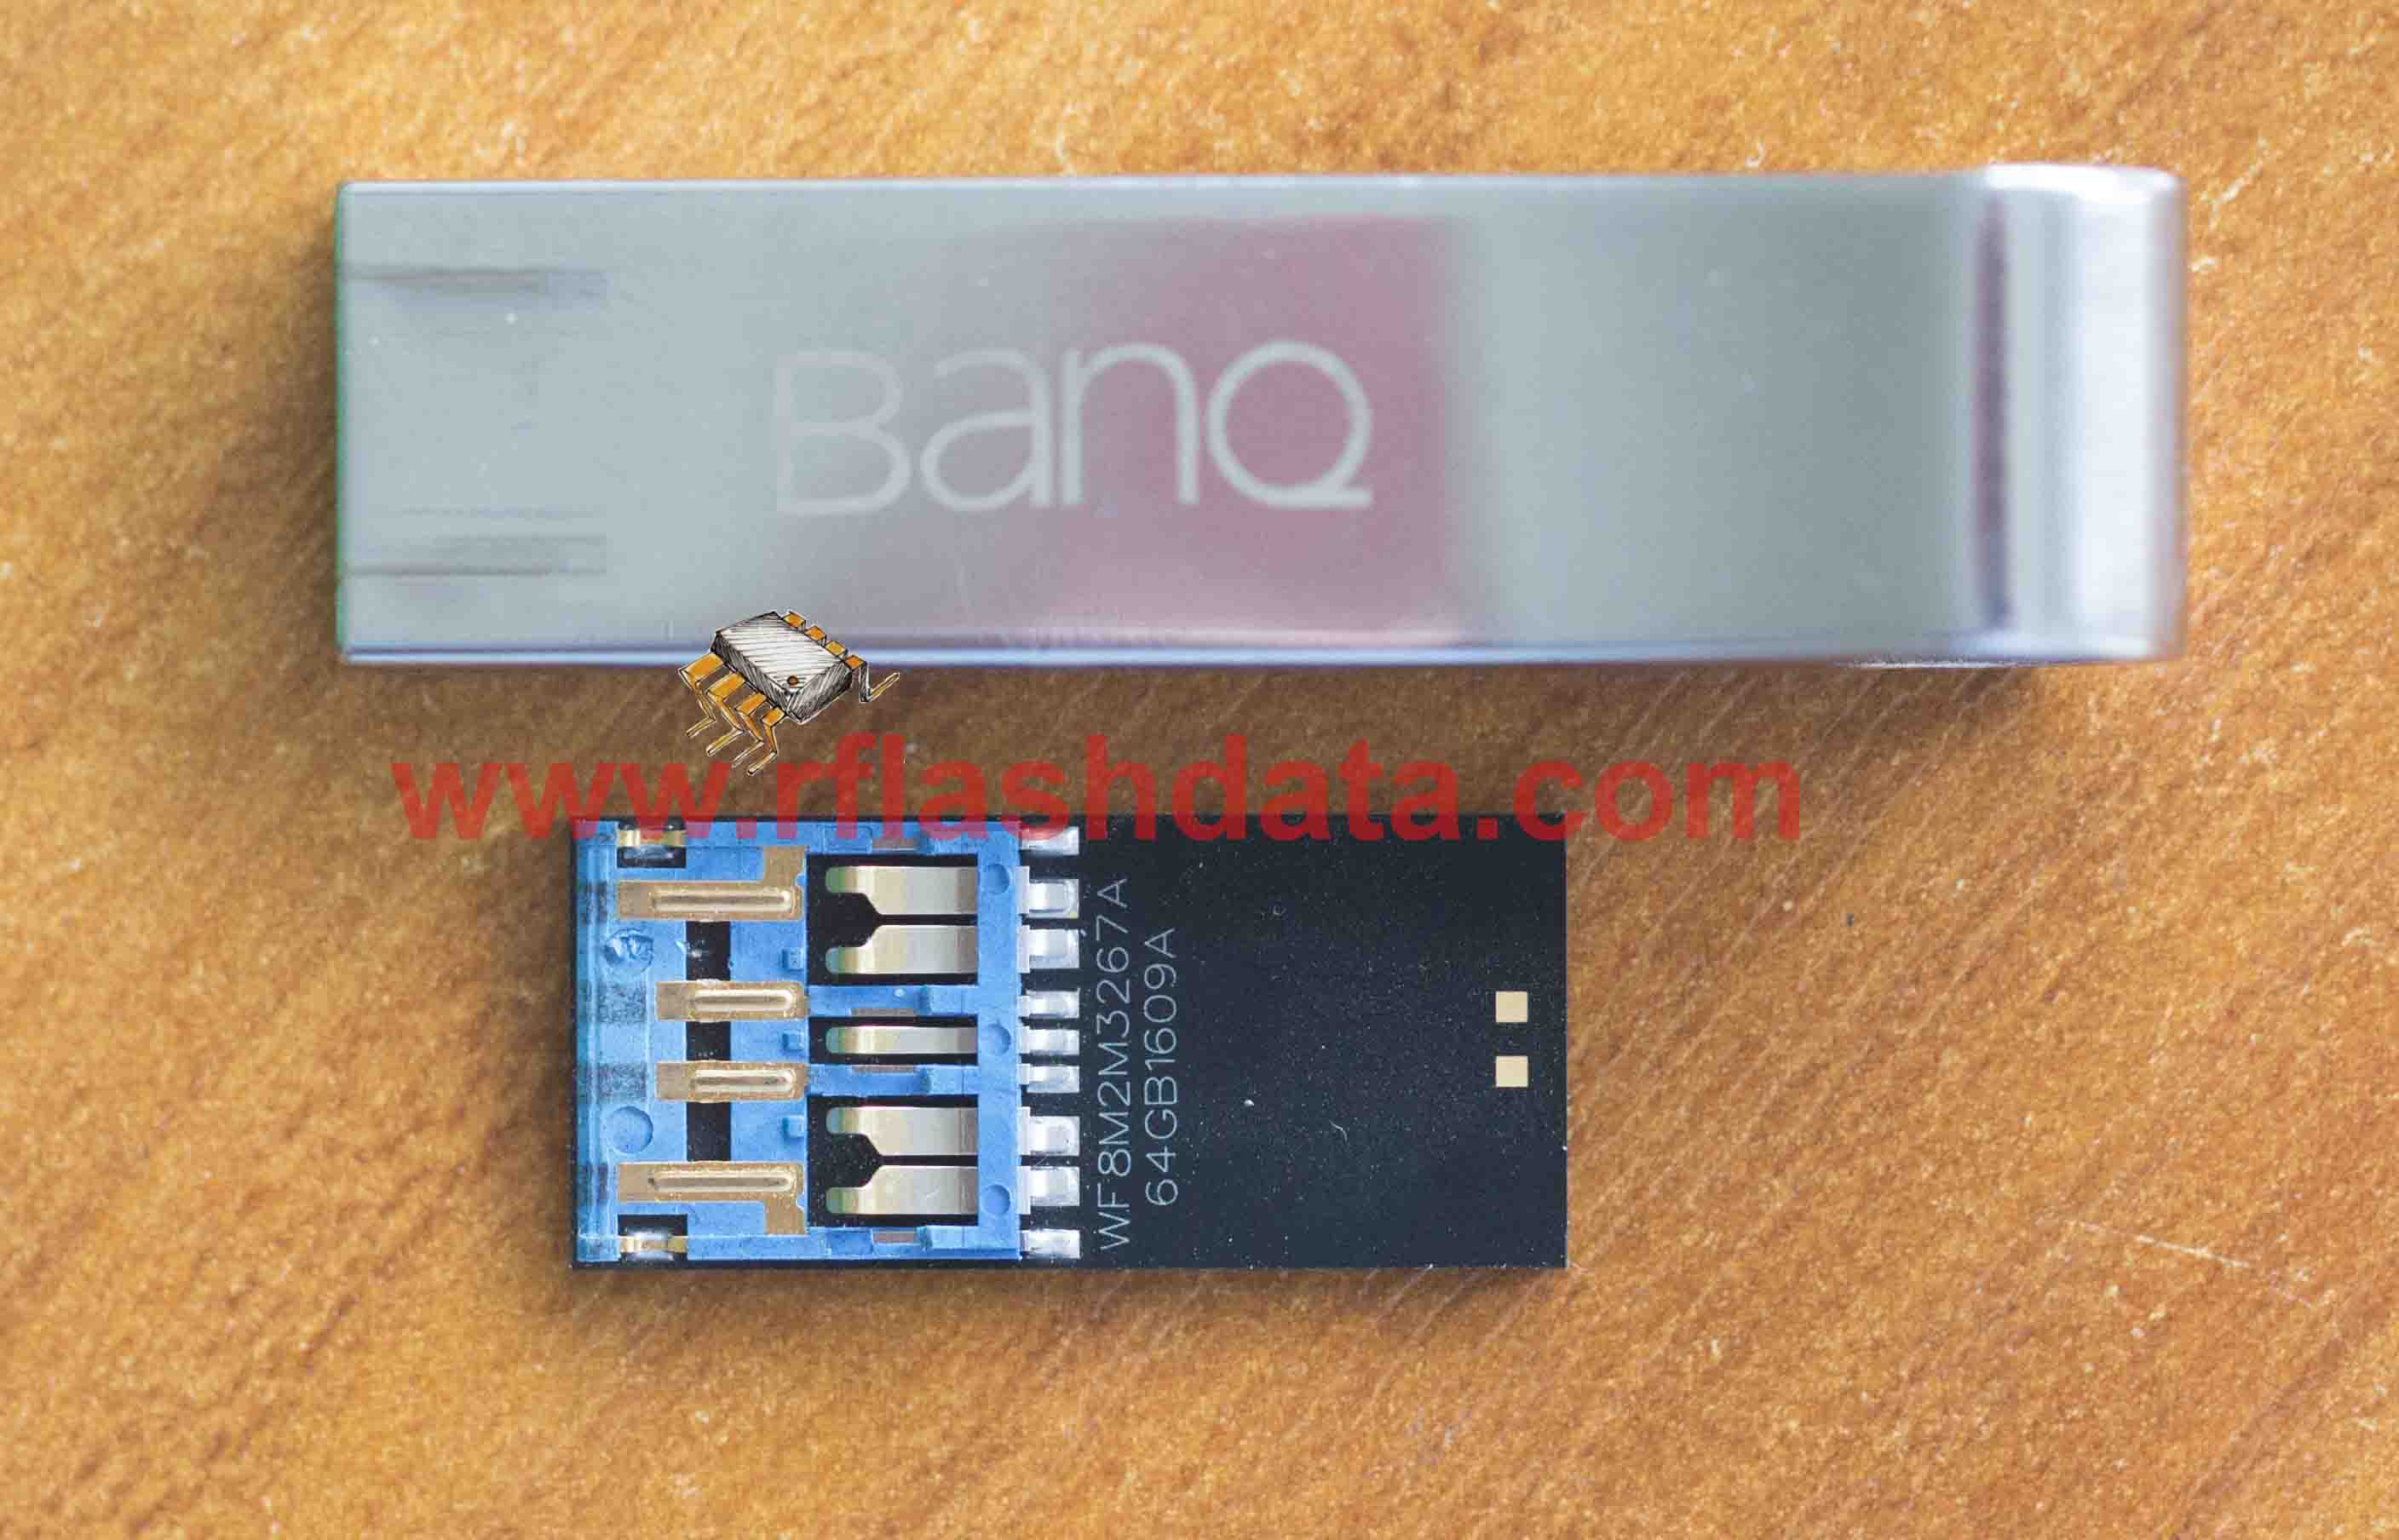 BanQ_flash_drive_data_recovery